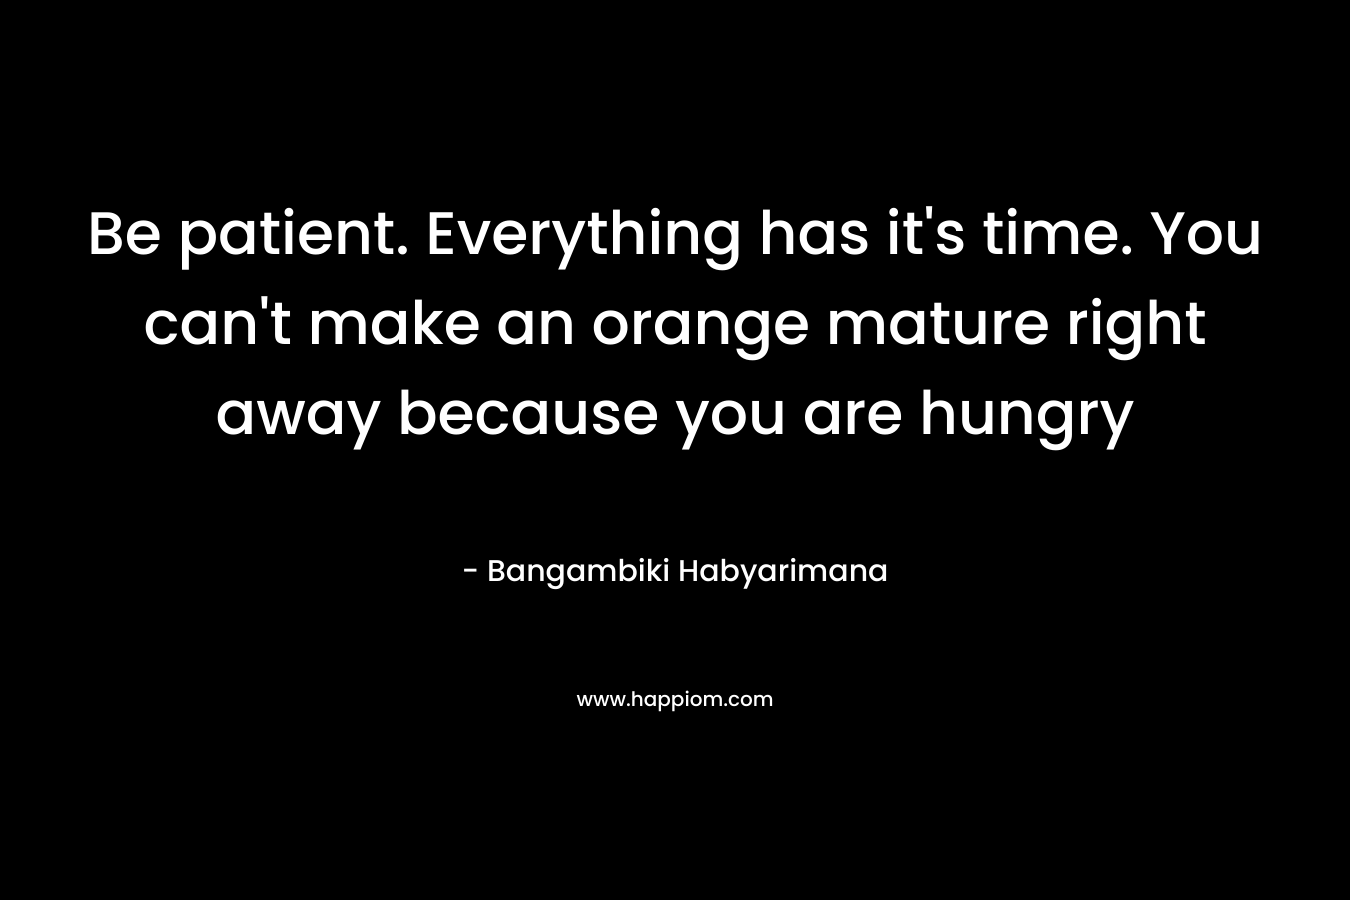 Be patient. Everything has it’s time. You can’t make an orange mature right away because you are hungry – Bangambiki Habyarimana